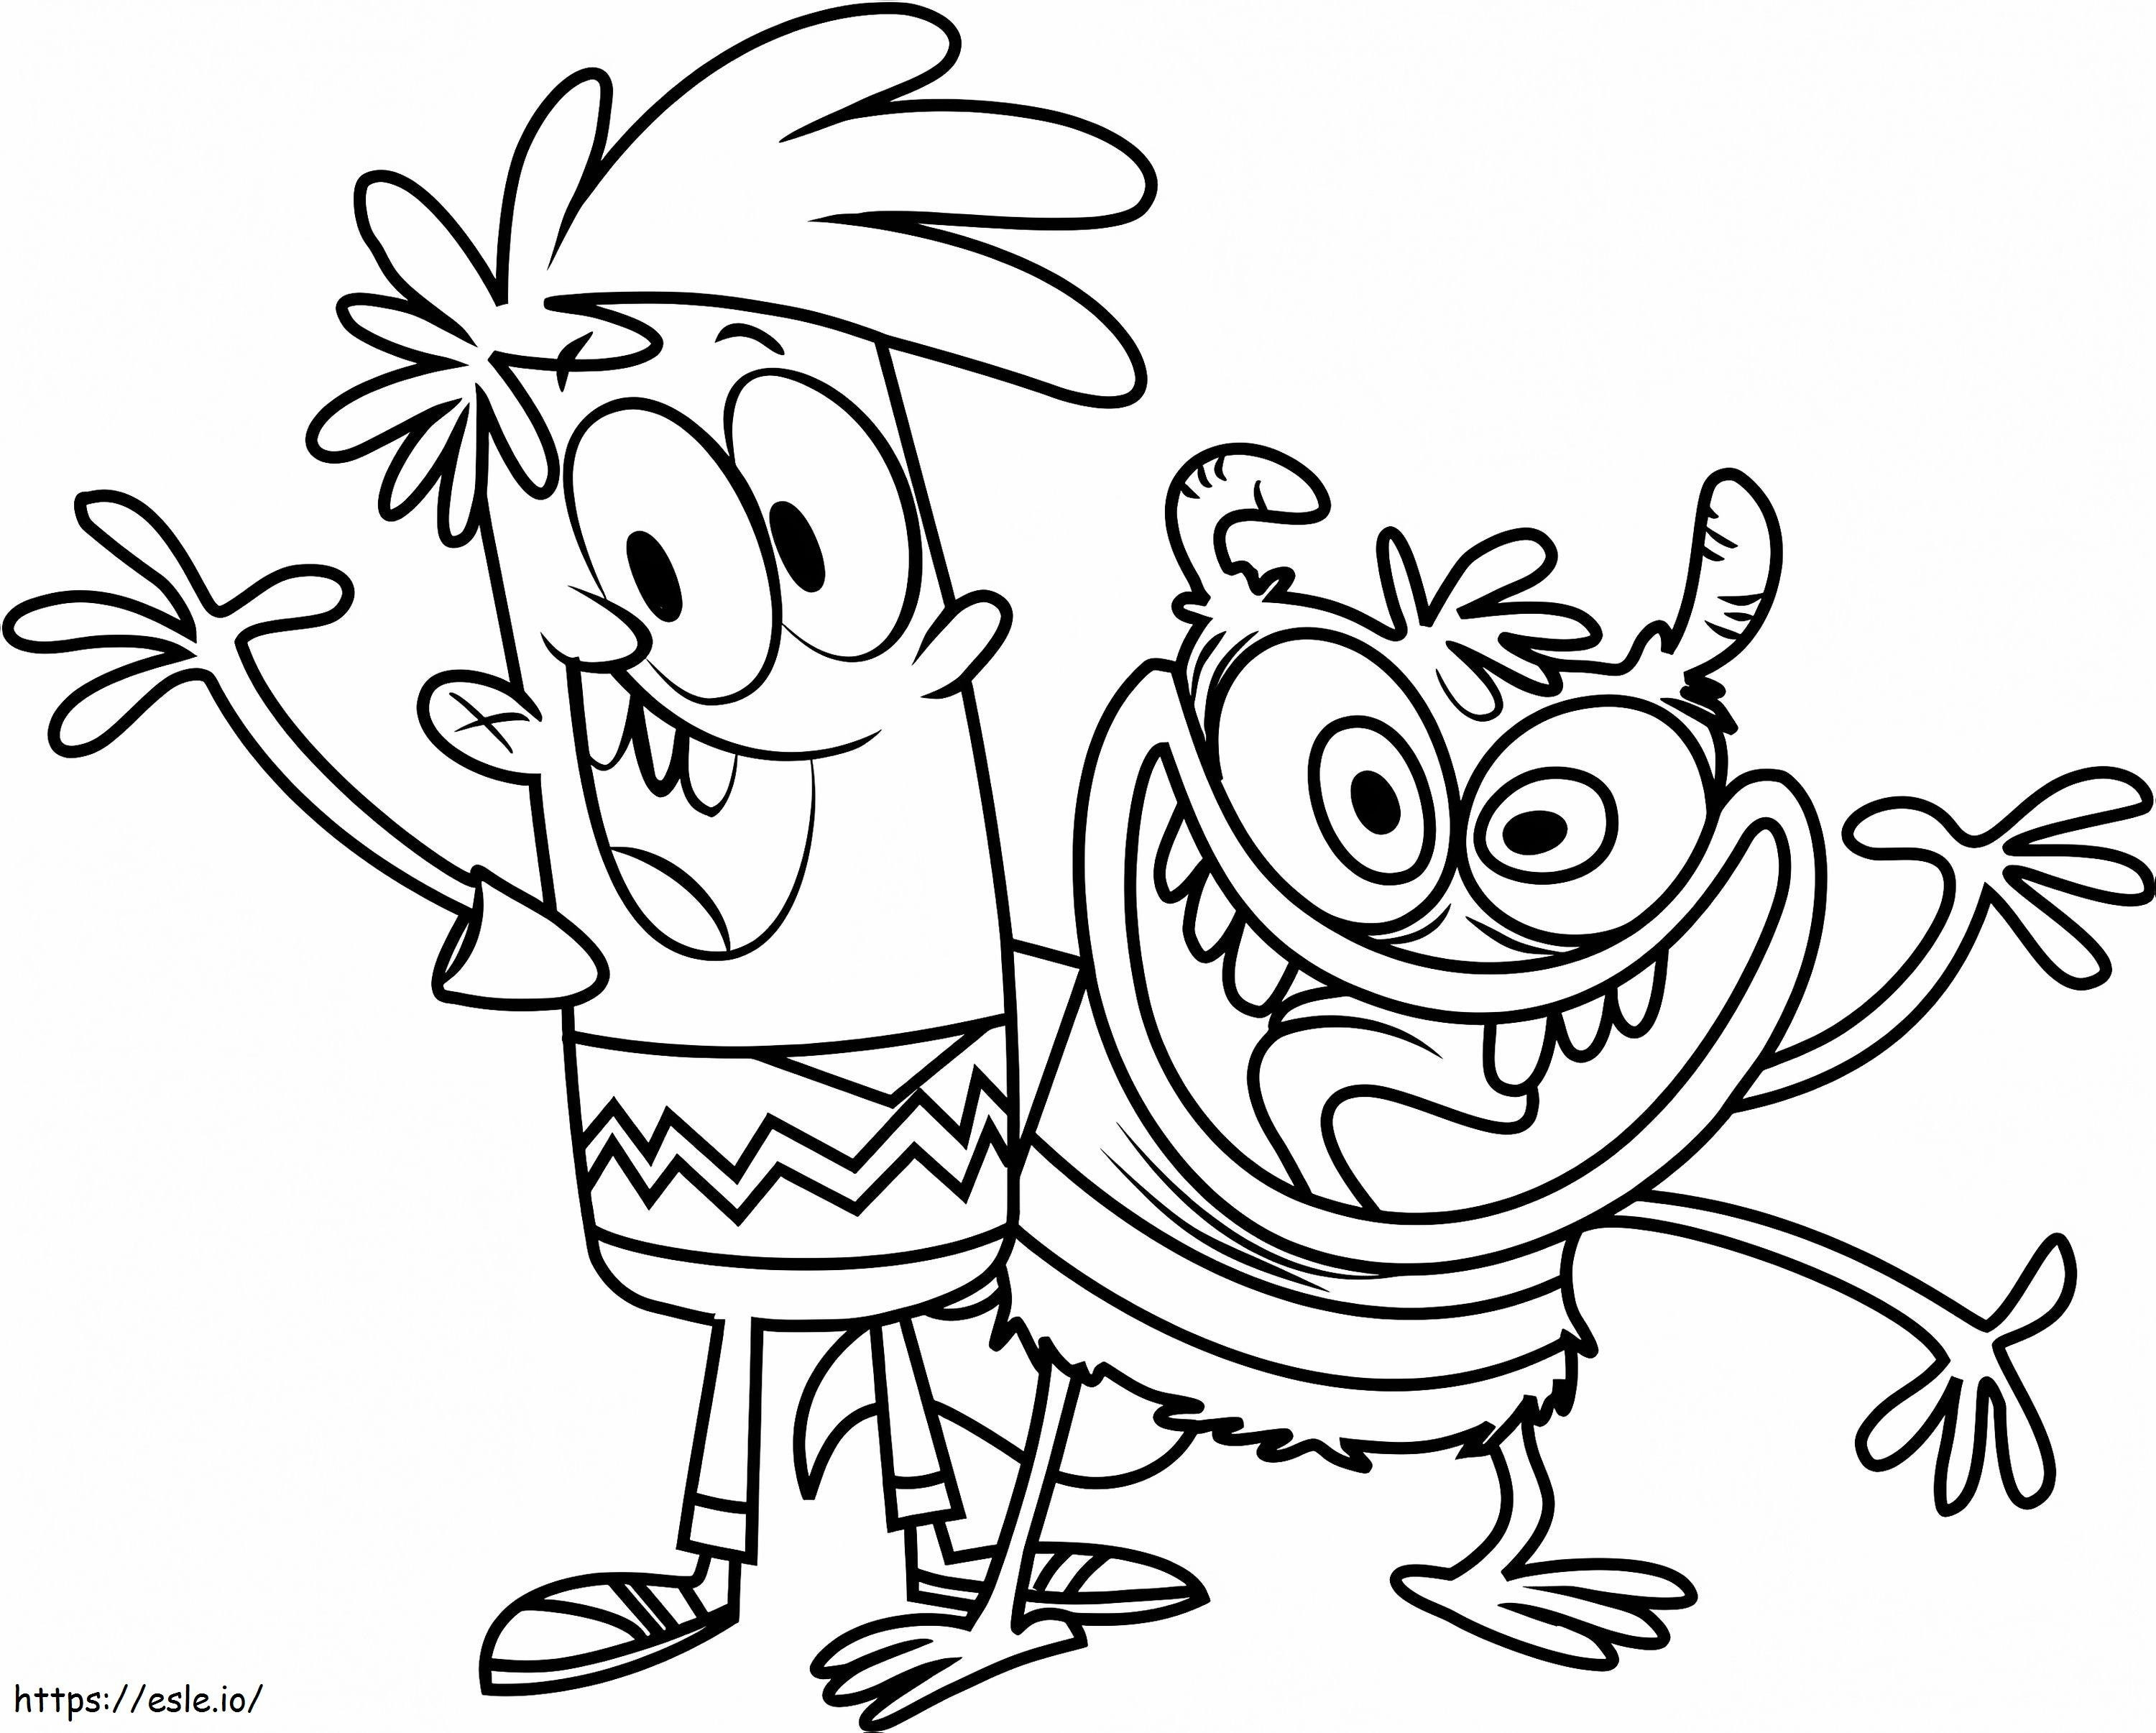 1531187398_Bunsen And Mikey A4 coloring page